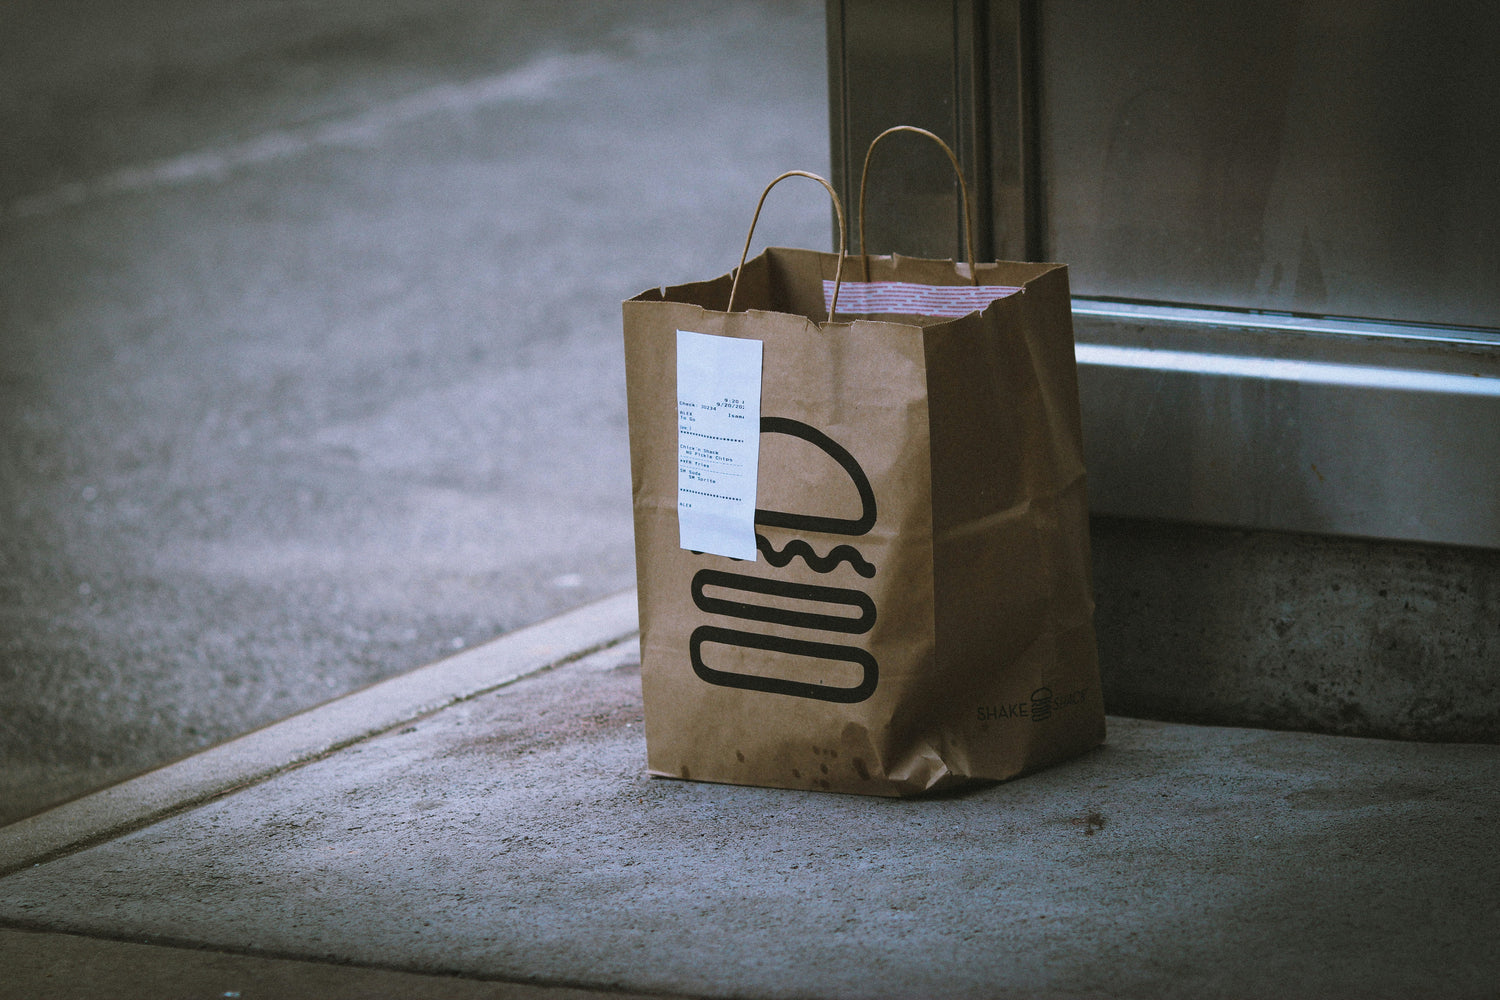 Restaurant Marketing for delivery and ubereats